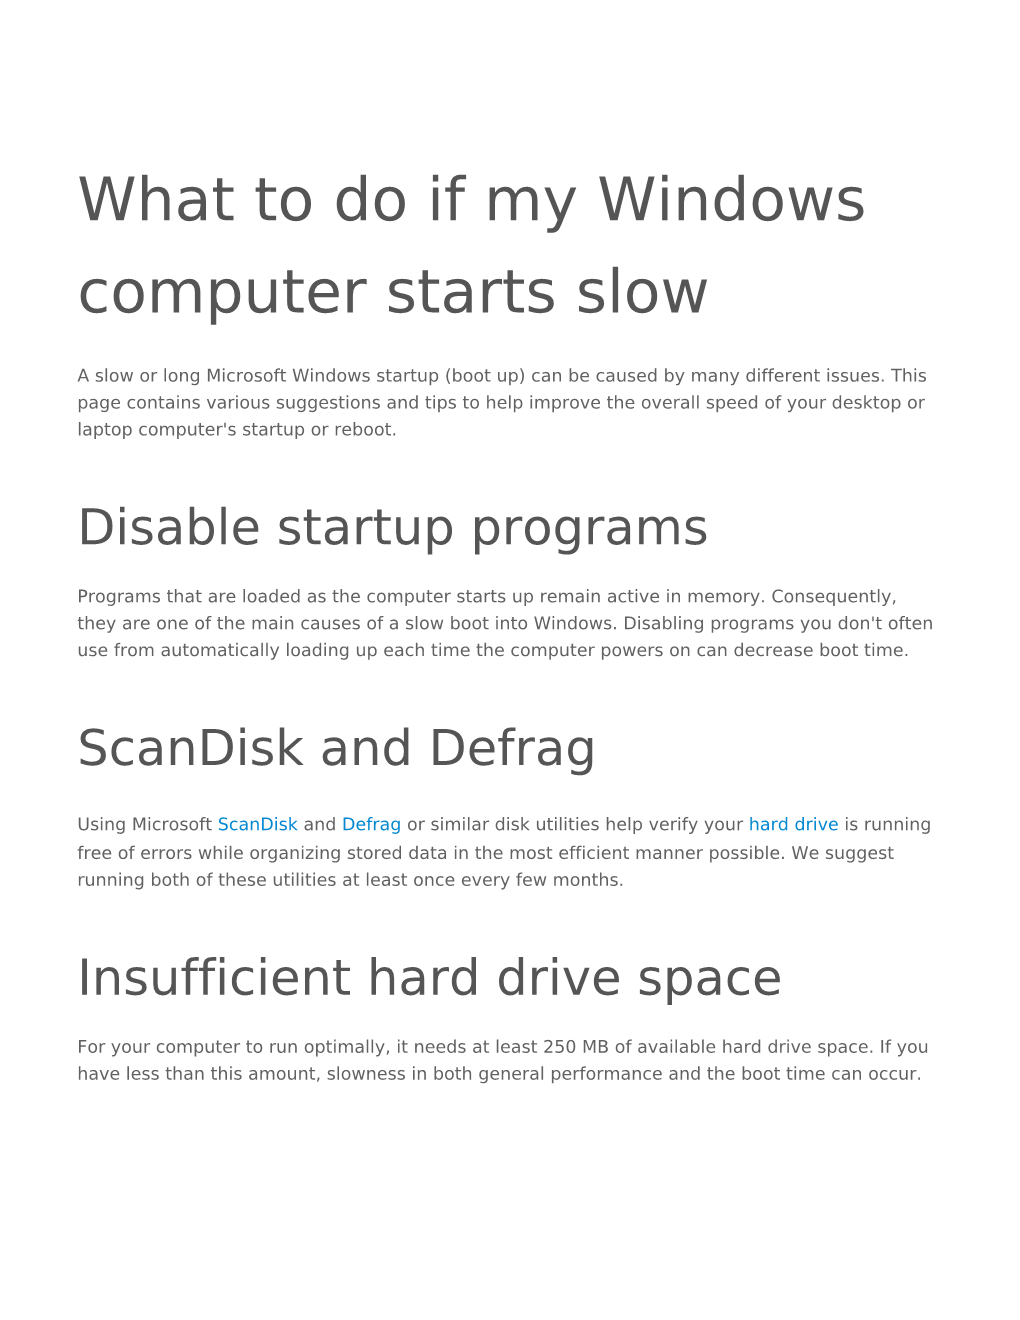 What to Do If My Windows Computer Starts Slow